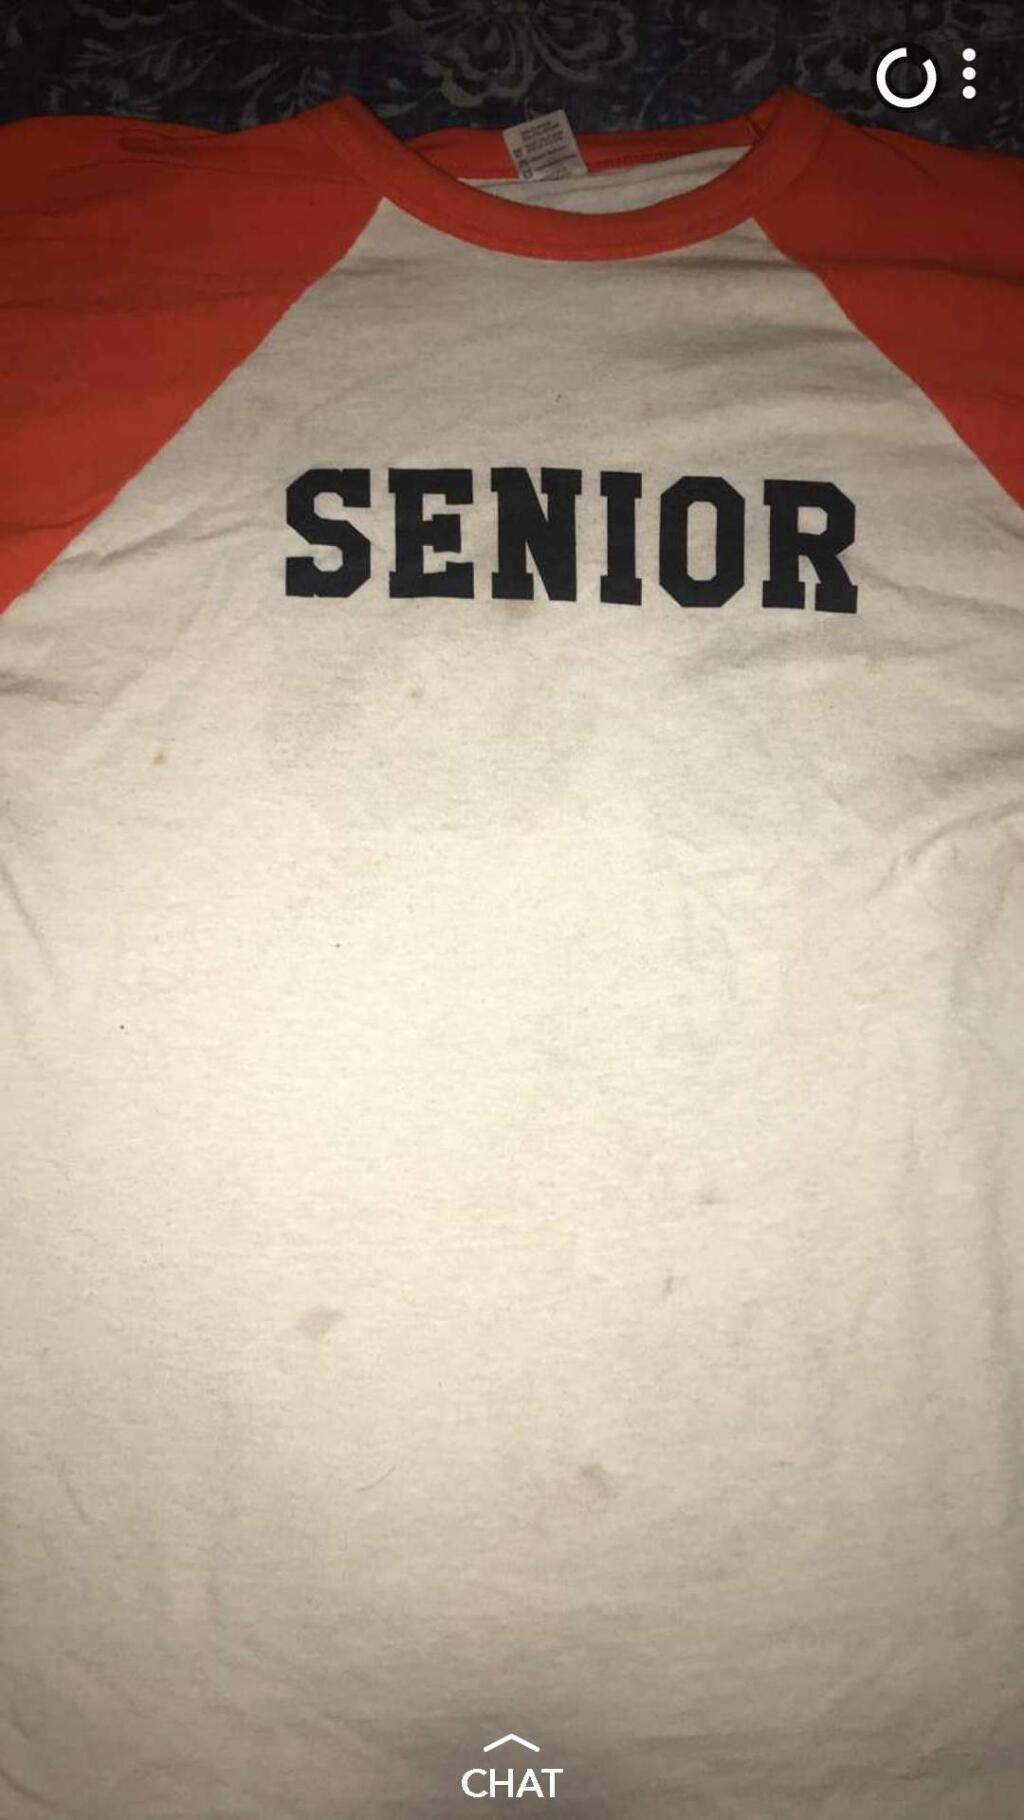 An example of the emblazoned T-shirts worn by senior students at Santa Rosa High School. (Courtesy photo)